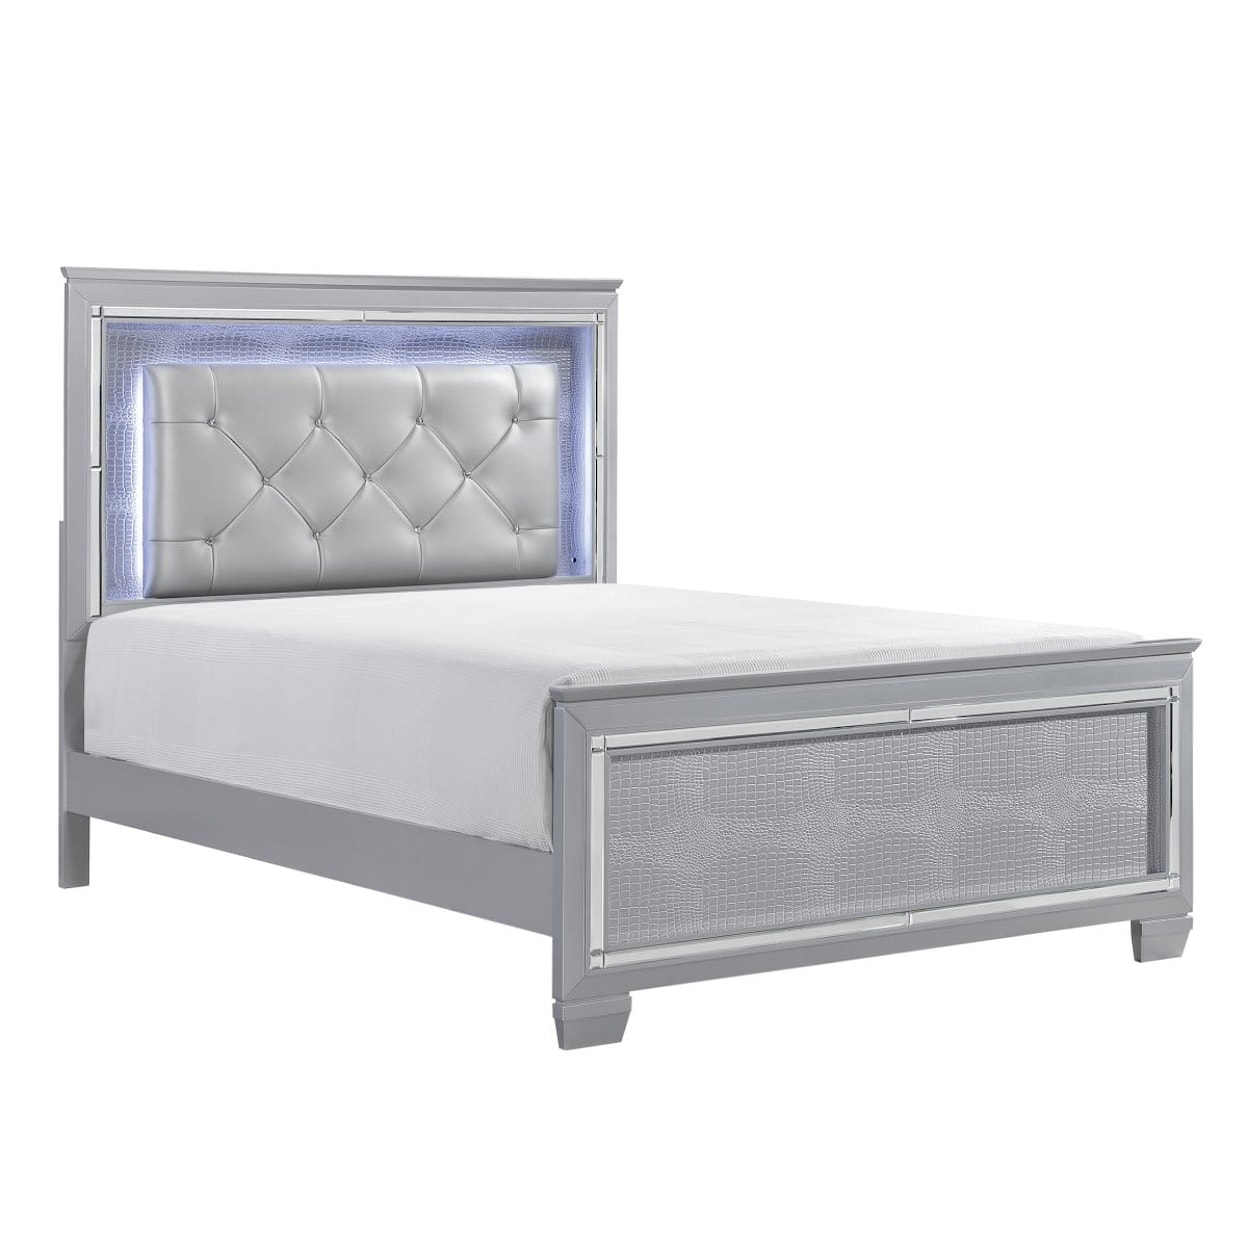 Homelegance Furniture Allura California King Panel Bed with LED Lights